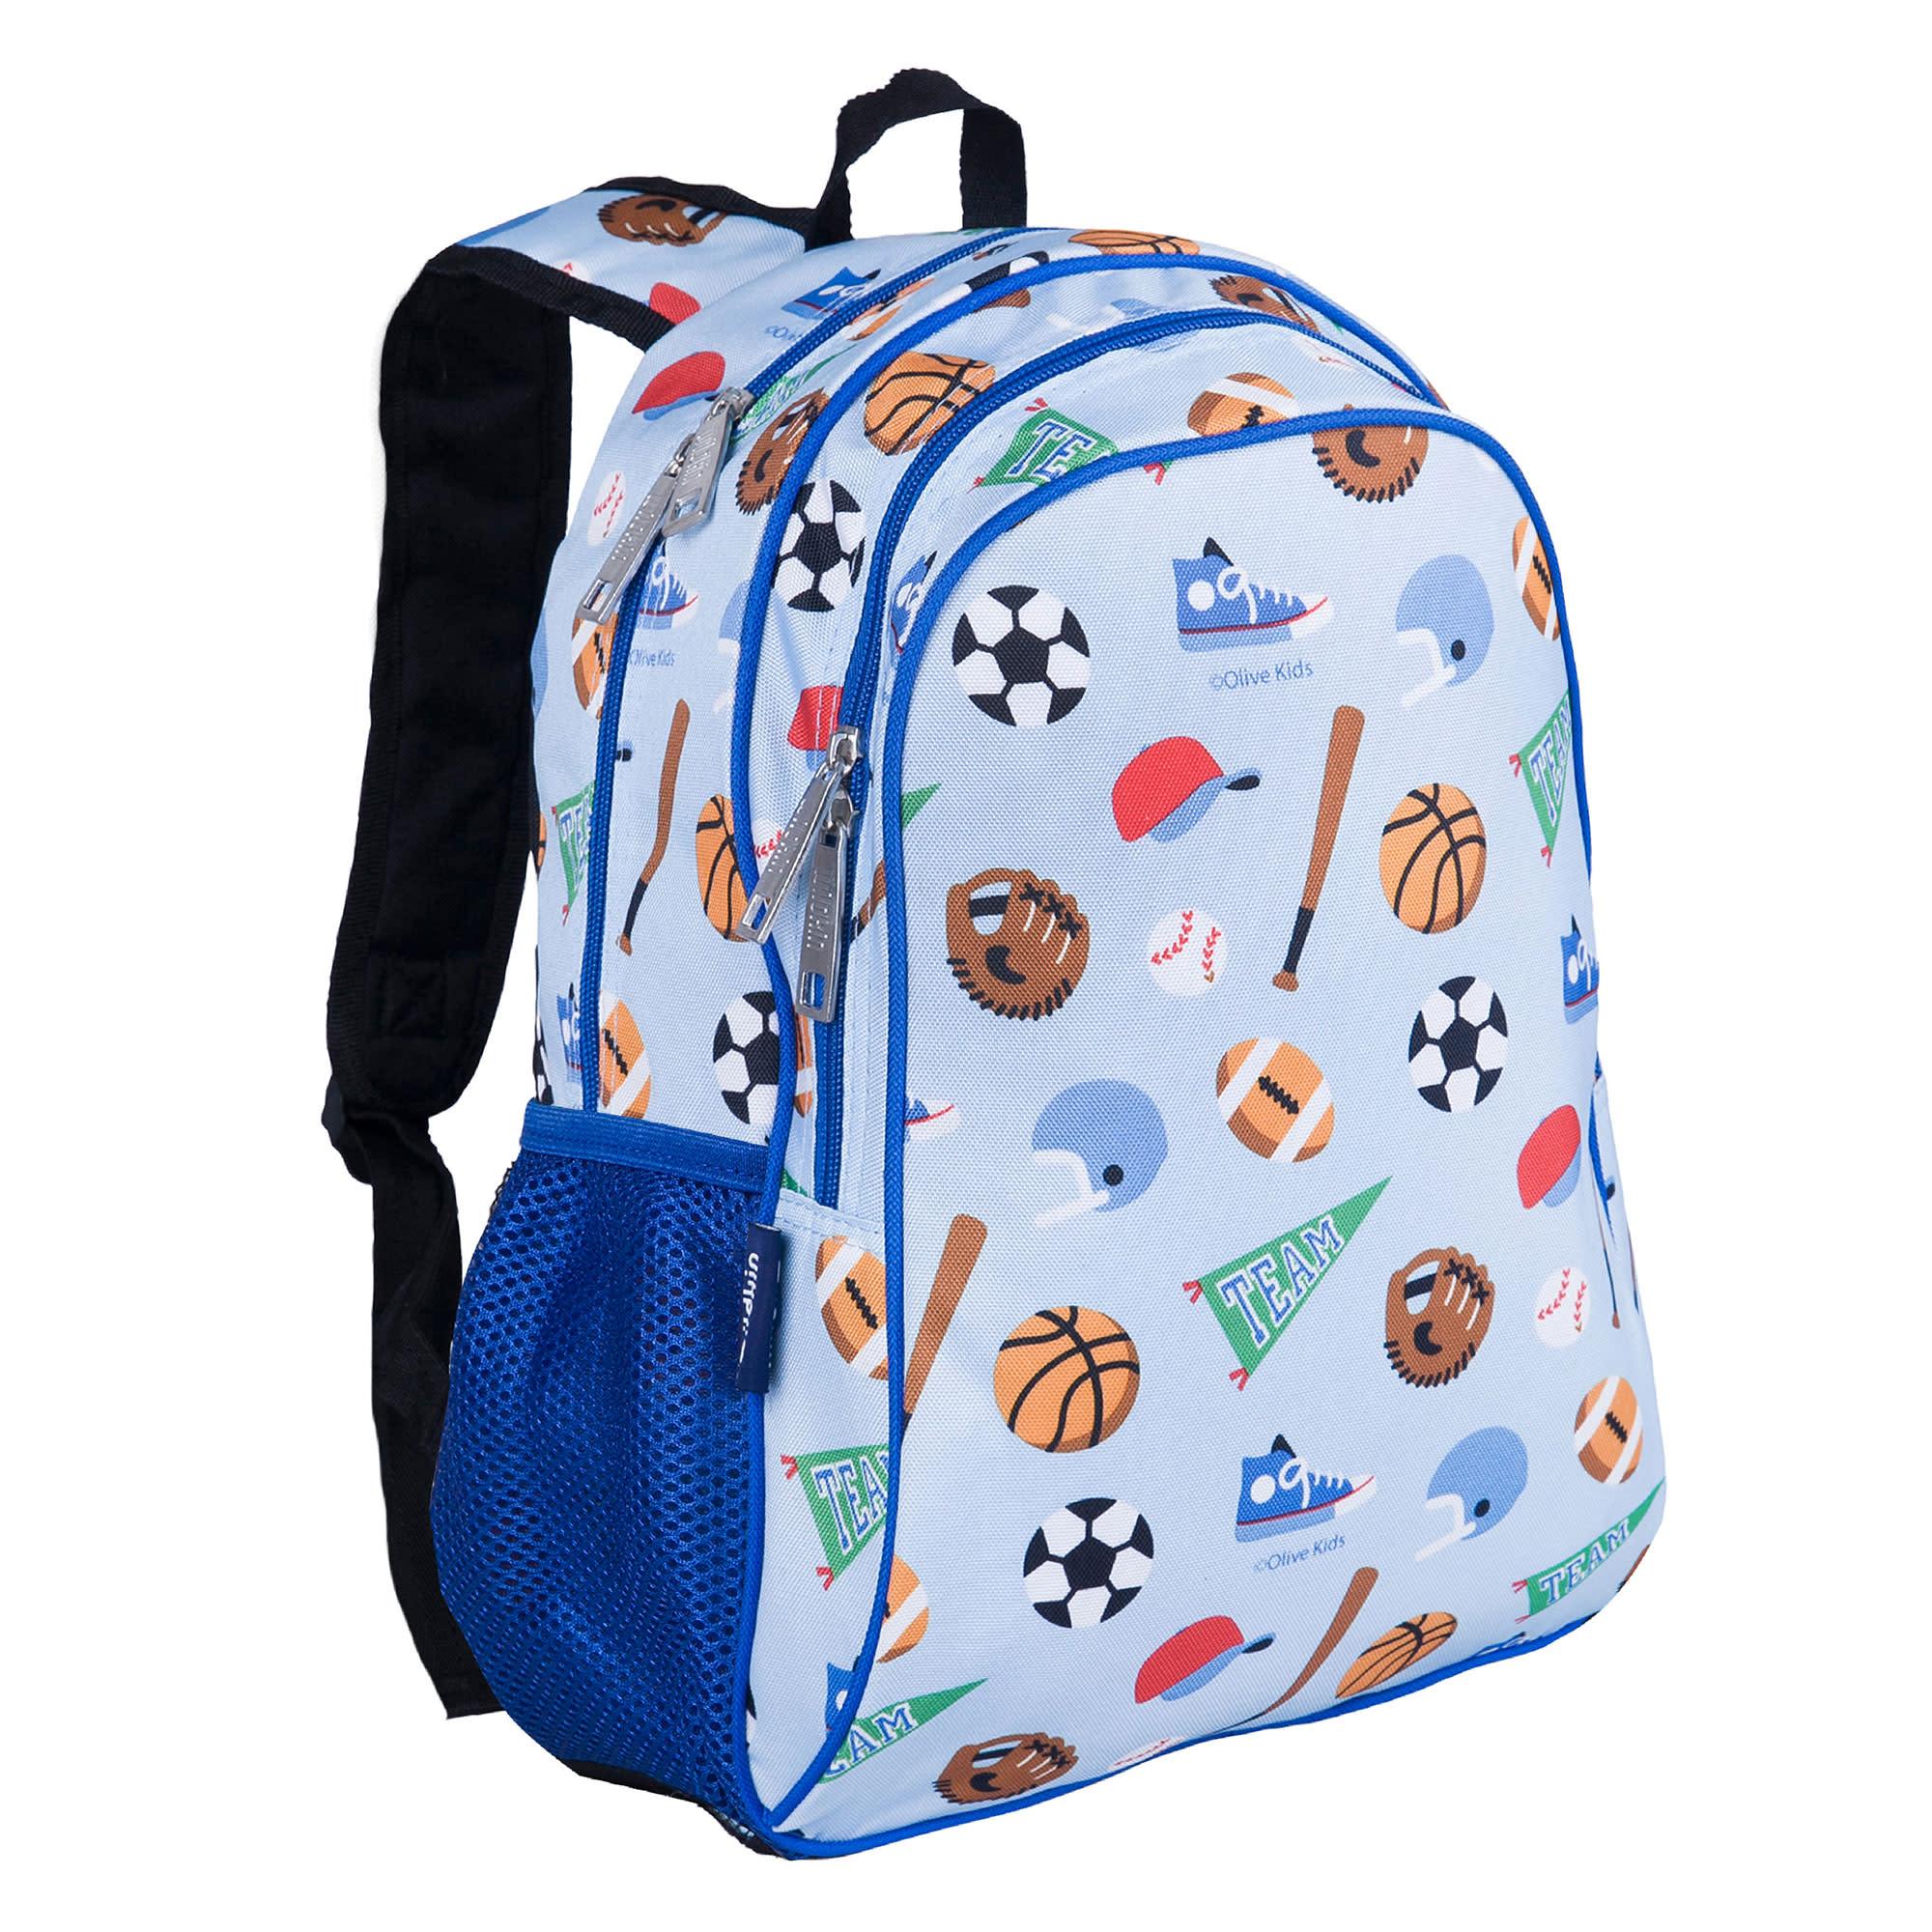 Game On Backpack